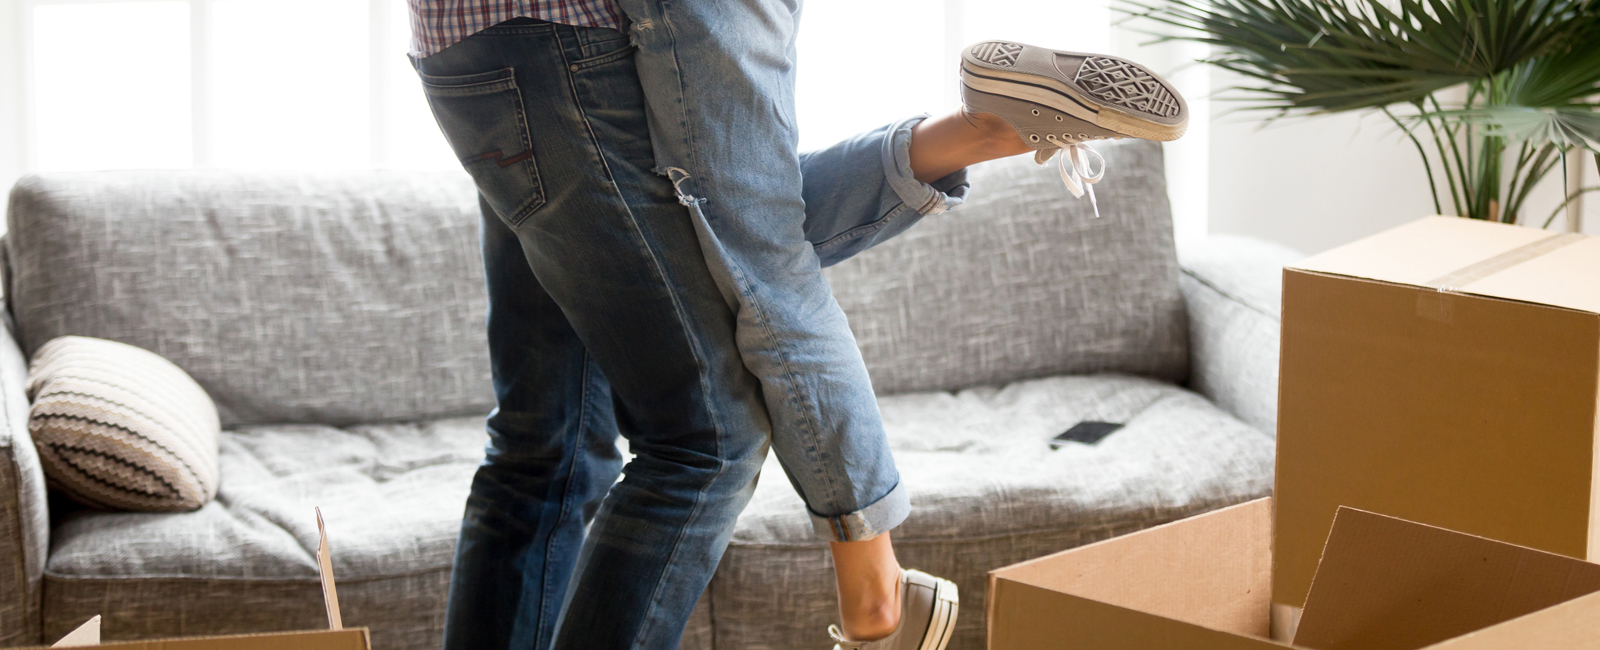 Mutual exchanges and other ways of moving home